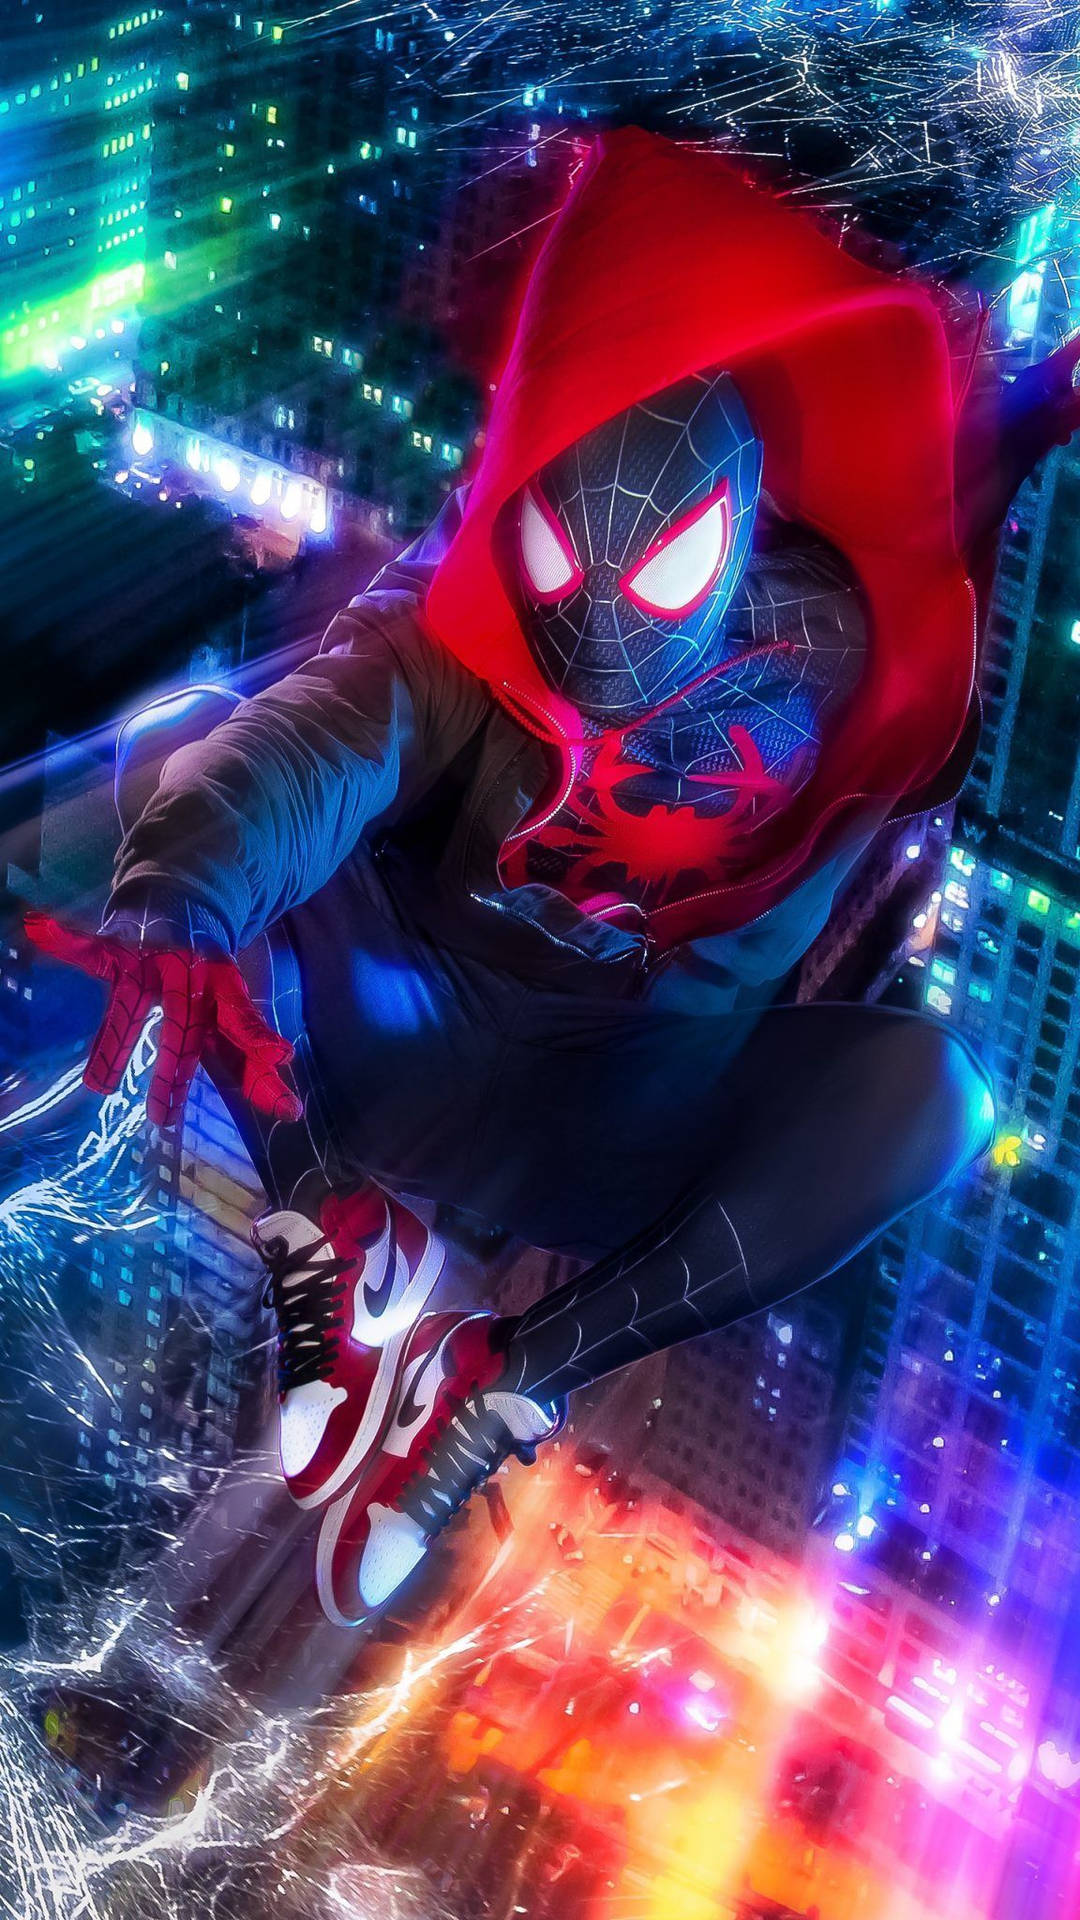 Spiderman blue on top of tall buildings with colorful light splashes.